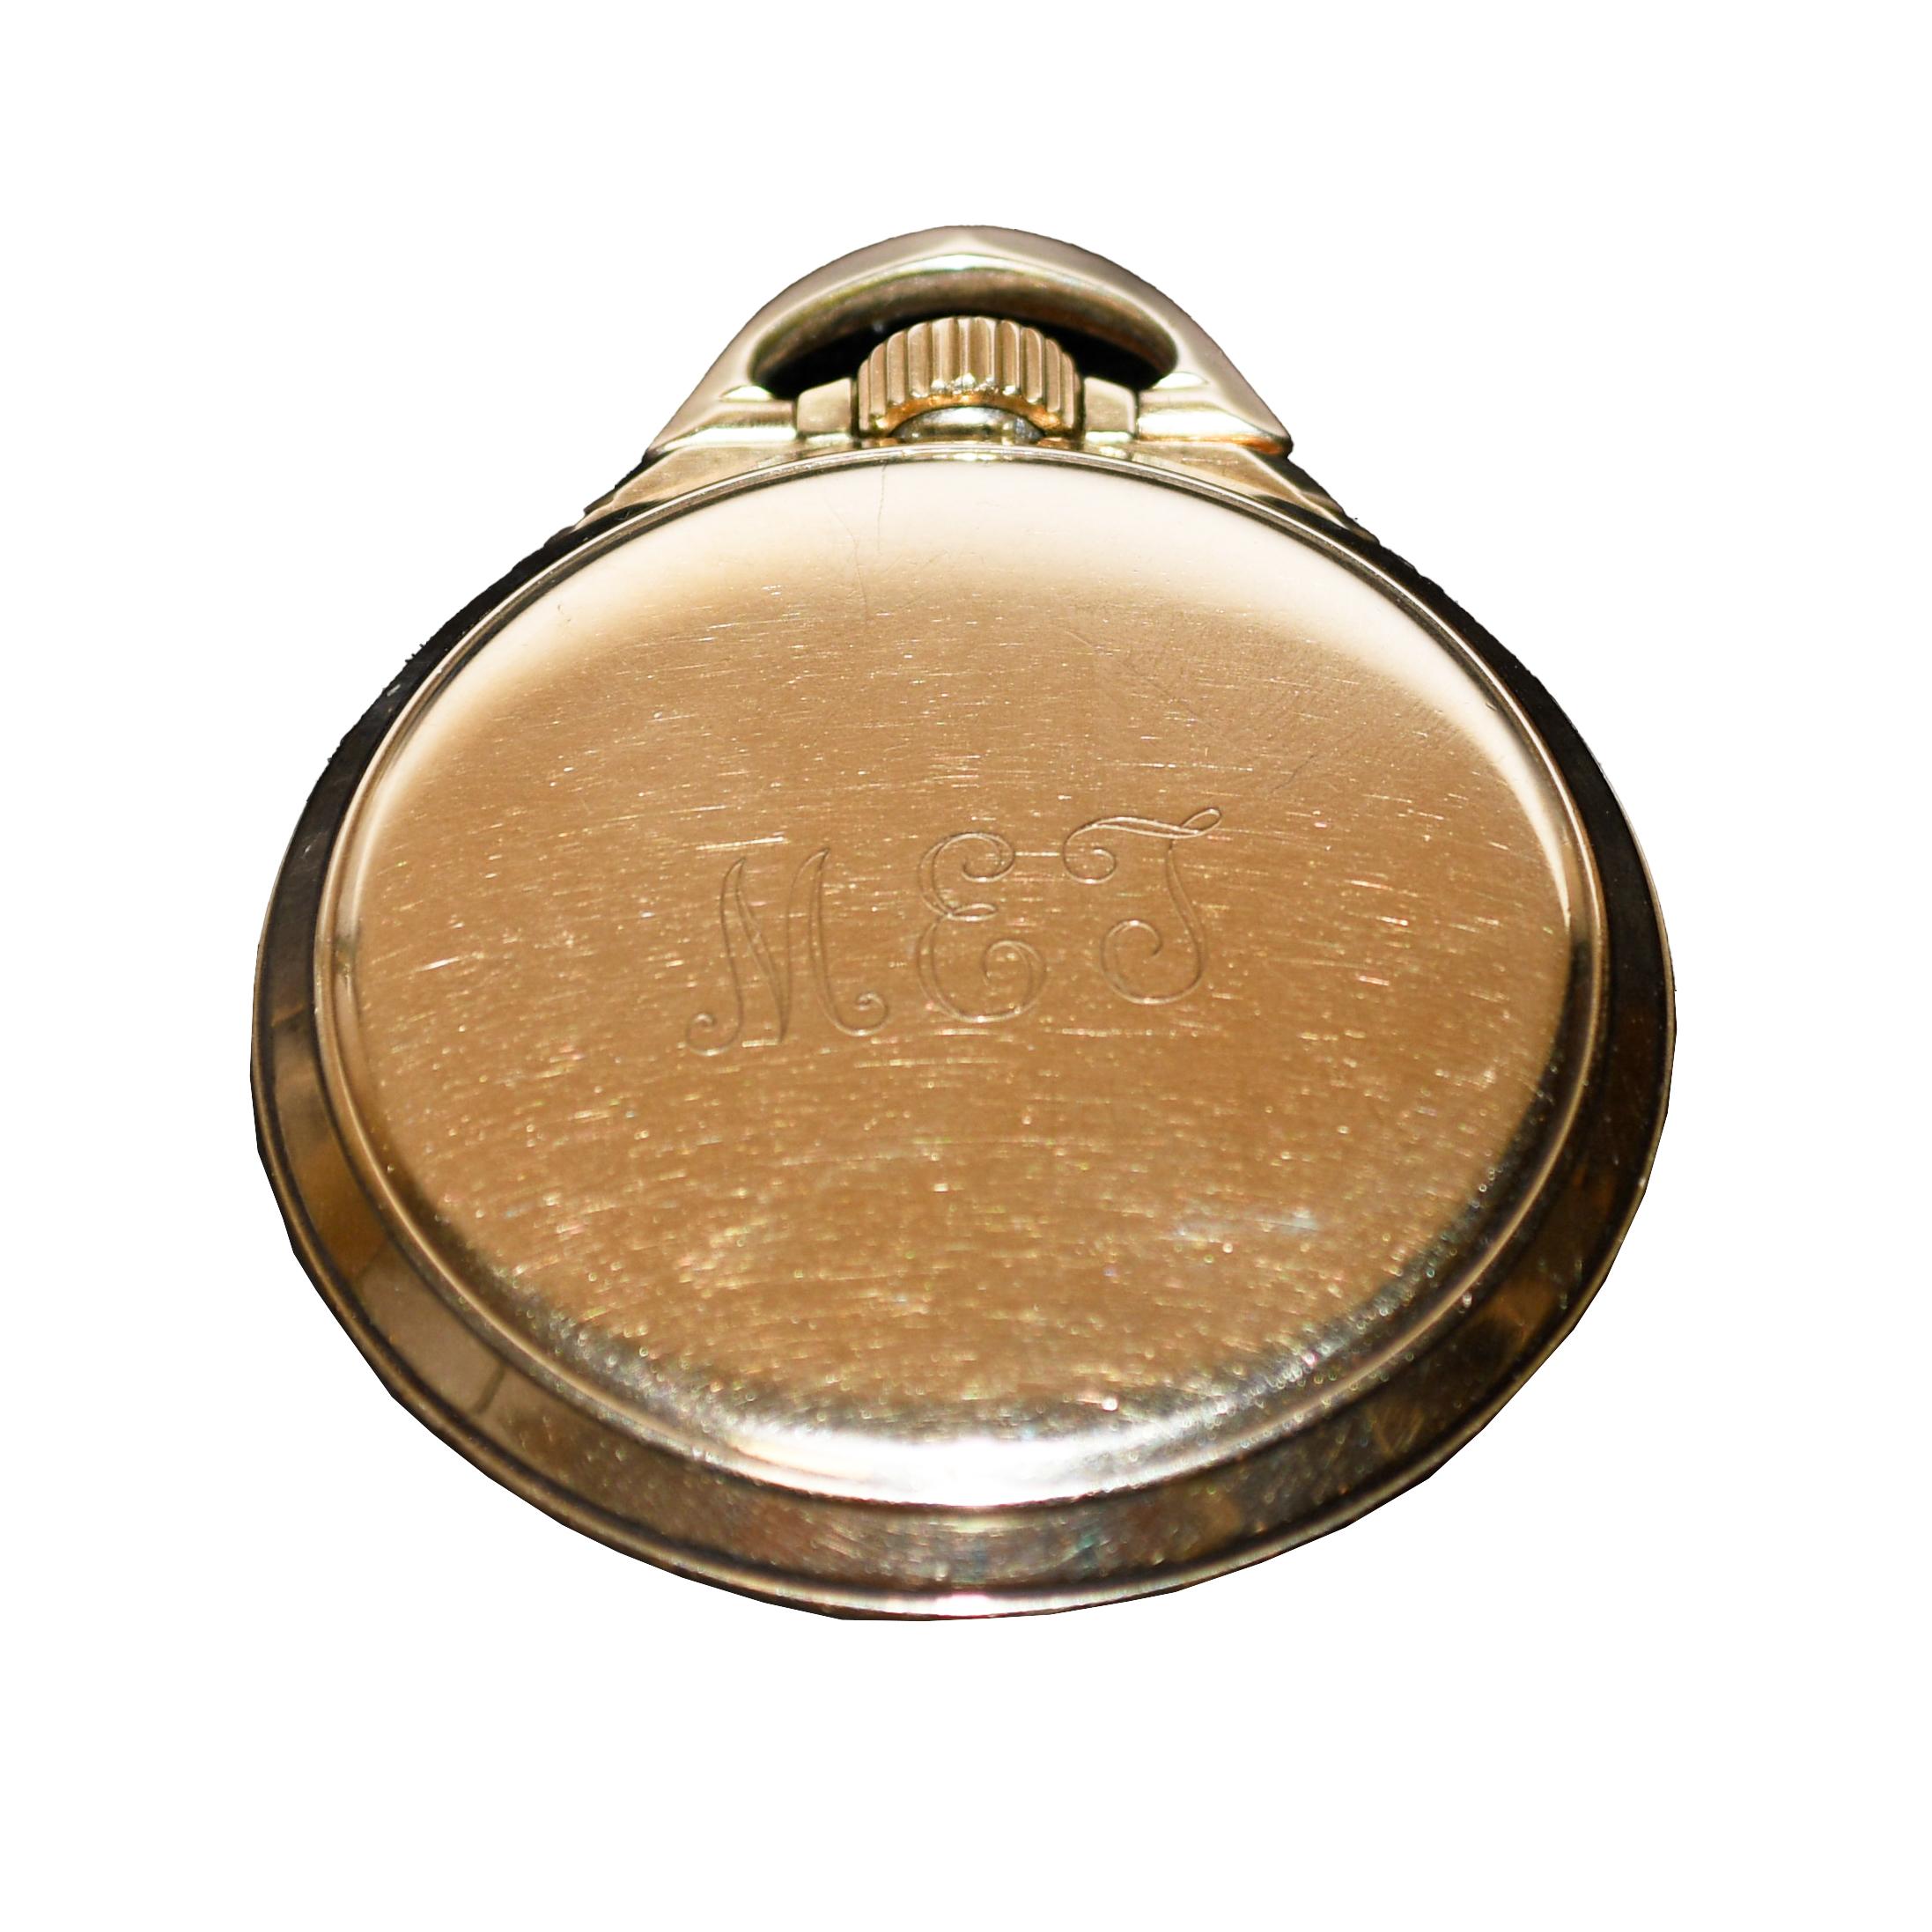 Elgin B.W. Raymond Pocket Watch 21 Jewels, Gold Filled In Excellent Condition For Sale In Laguna Beach, CA